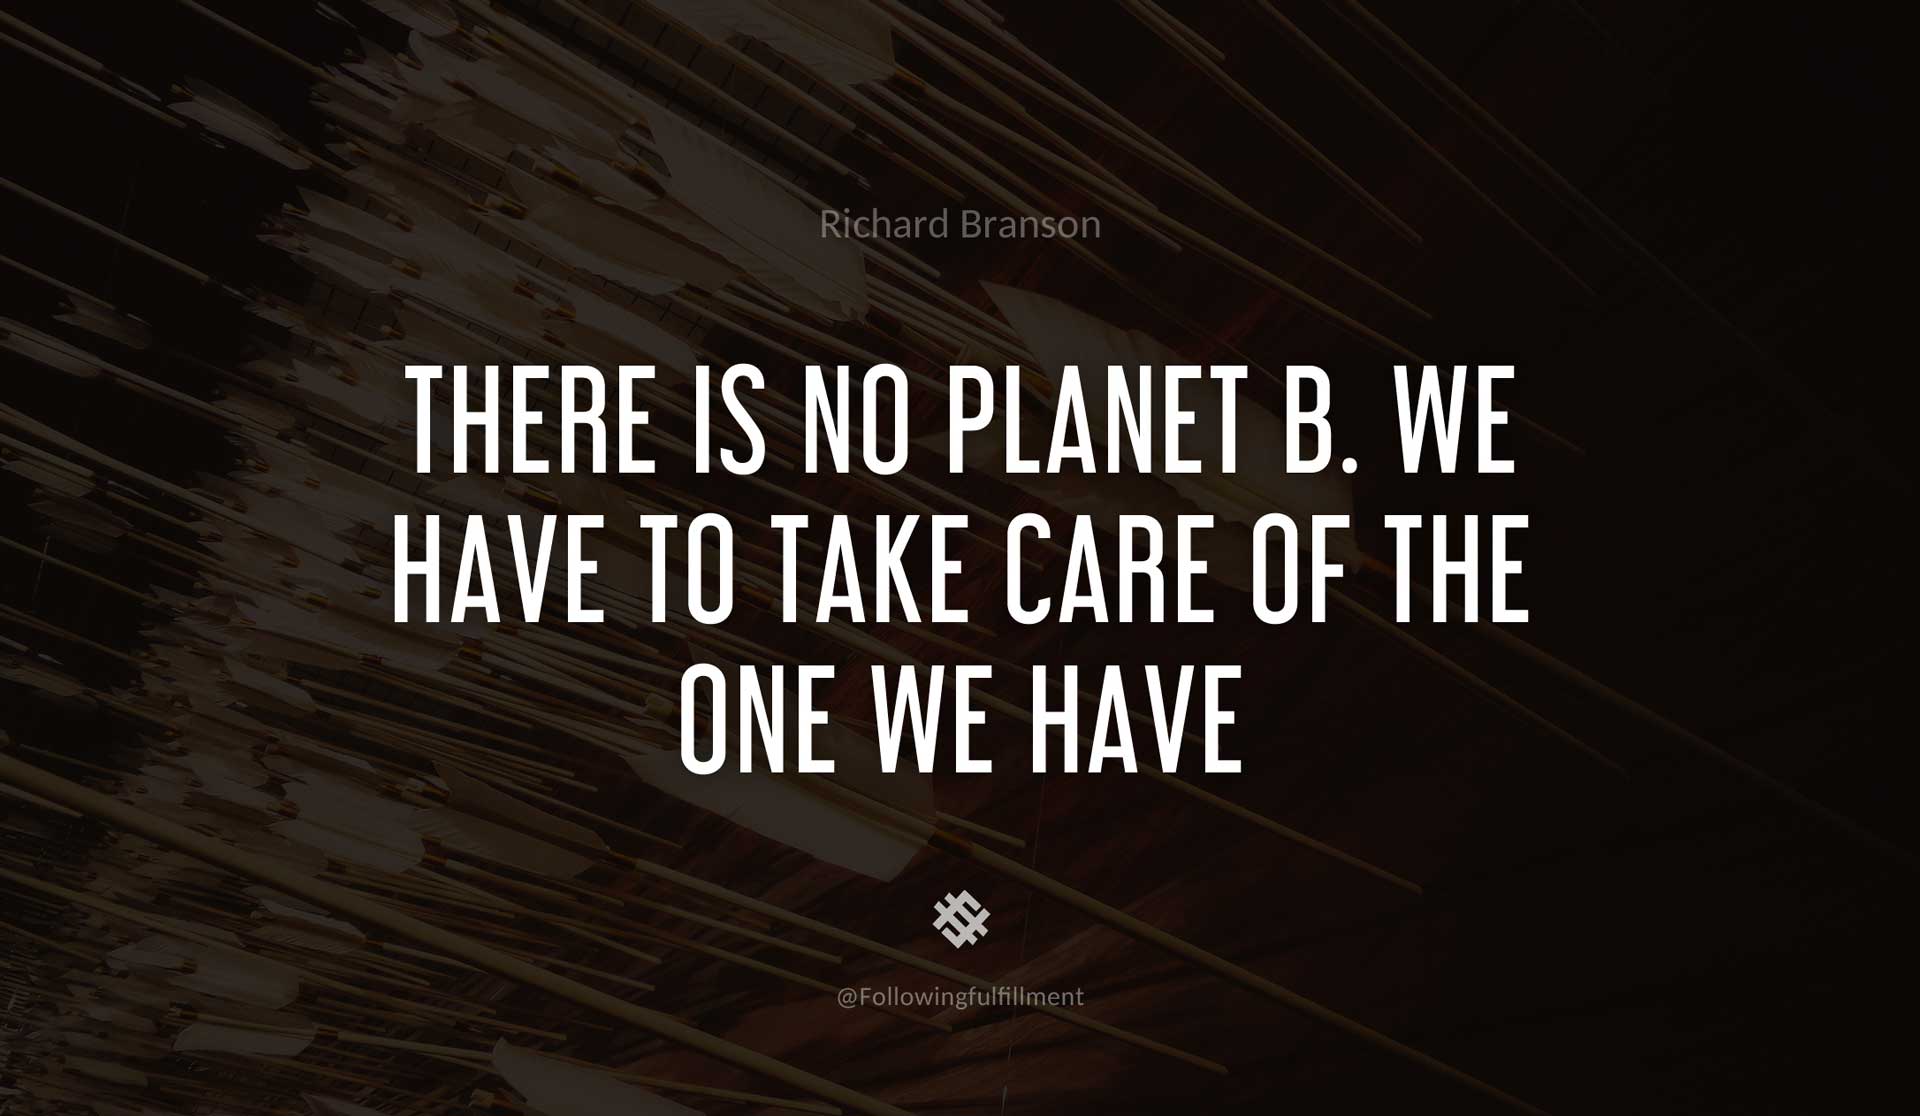 There-is-no-planet-B.-We-have-to-take-care-of-the-one-we-have-RICHARD-BRANSON-Quote.jpg